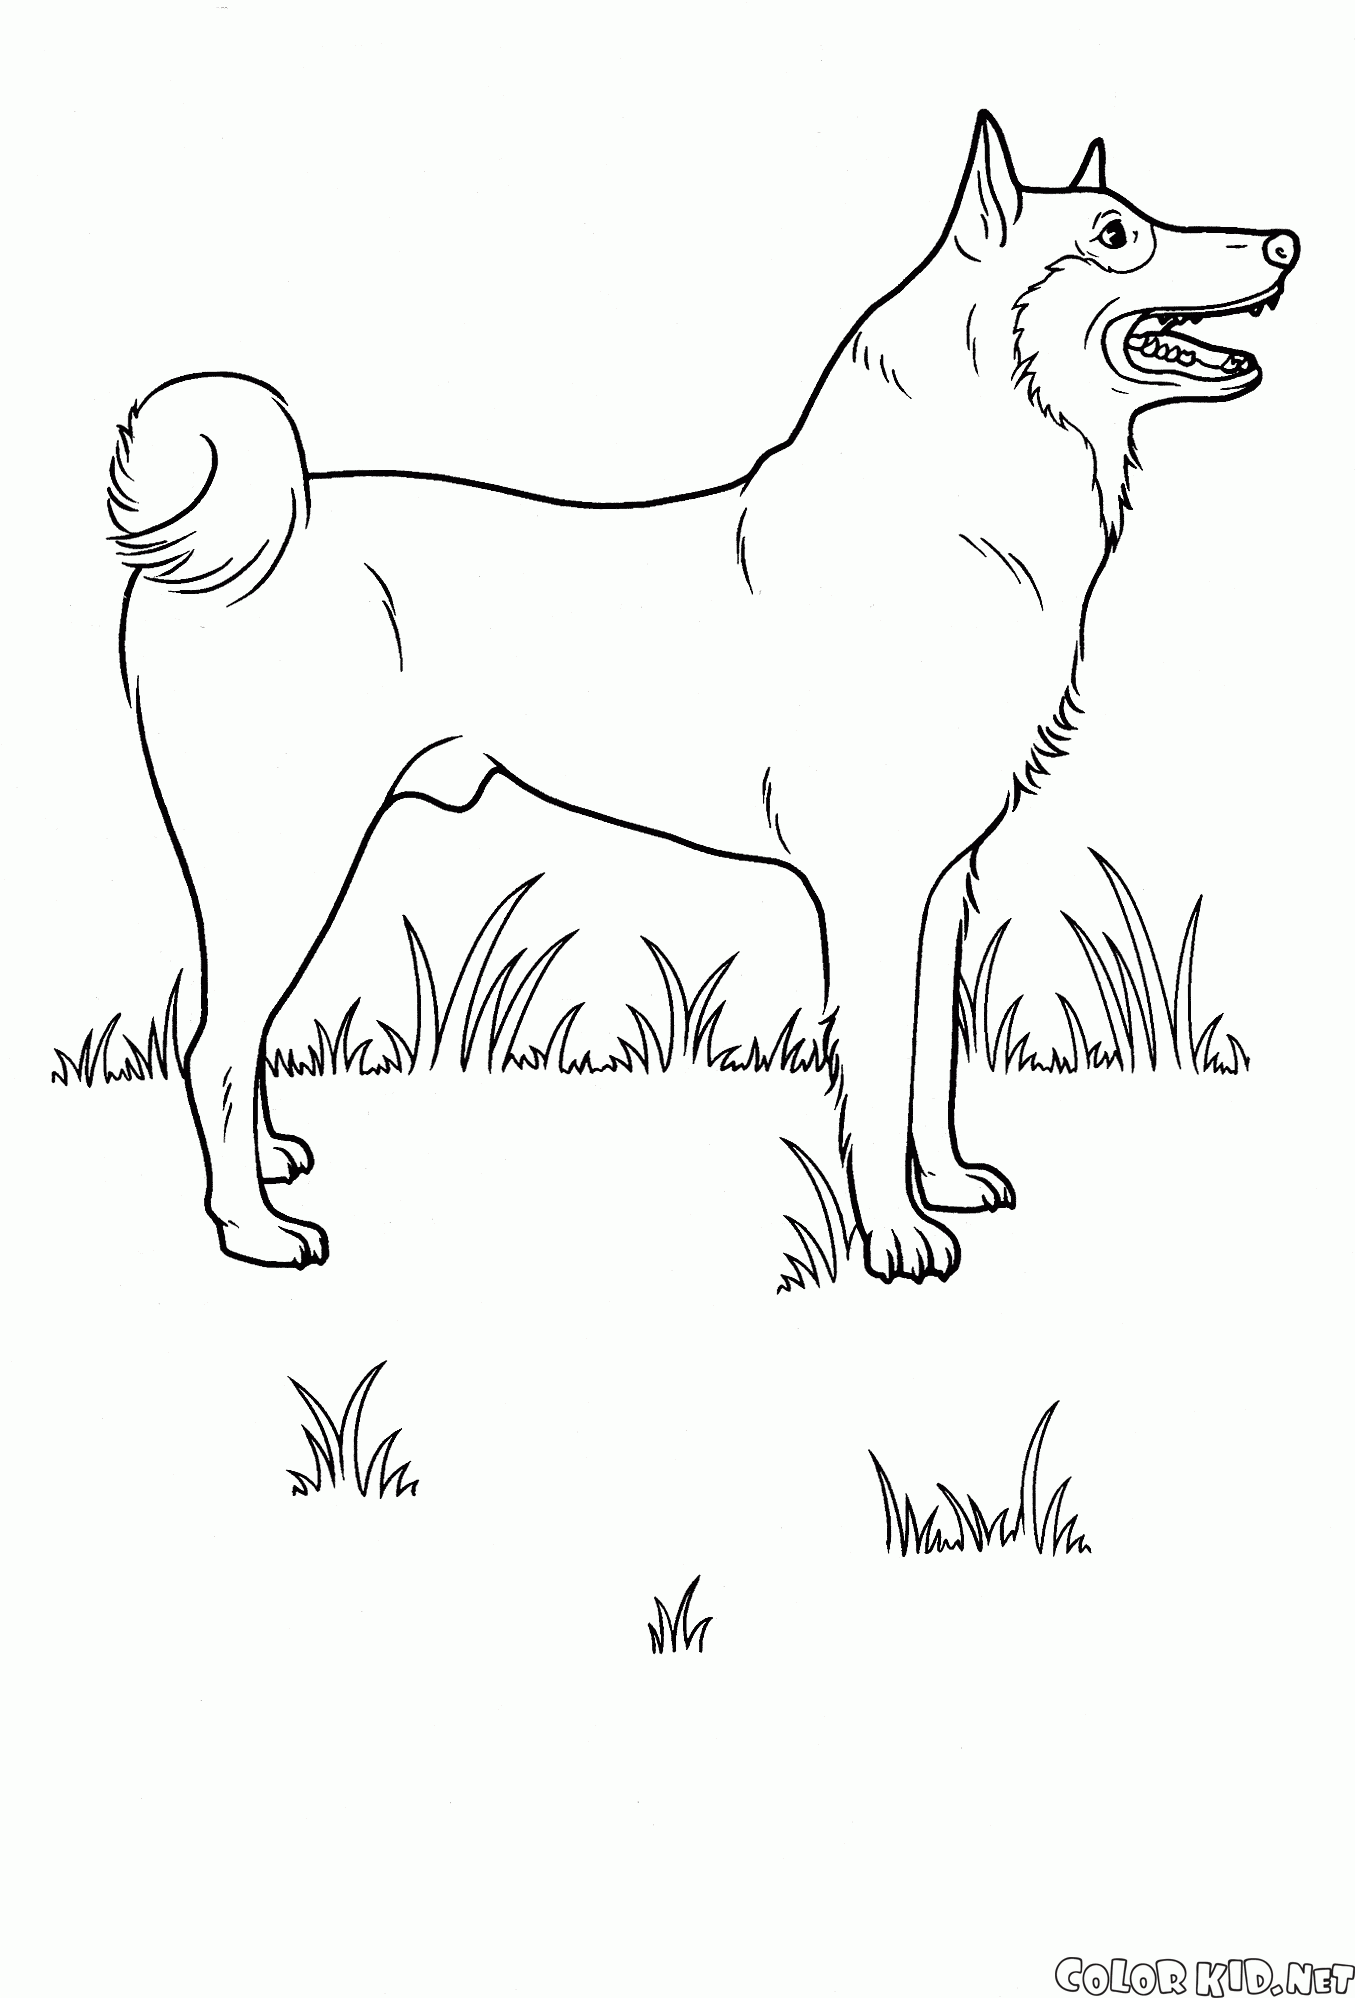 Dog on the meadow